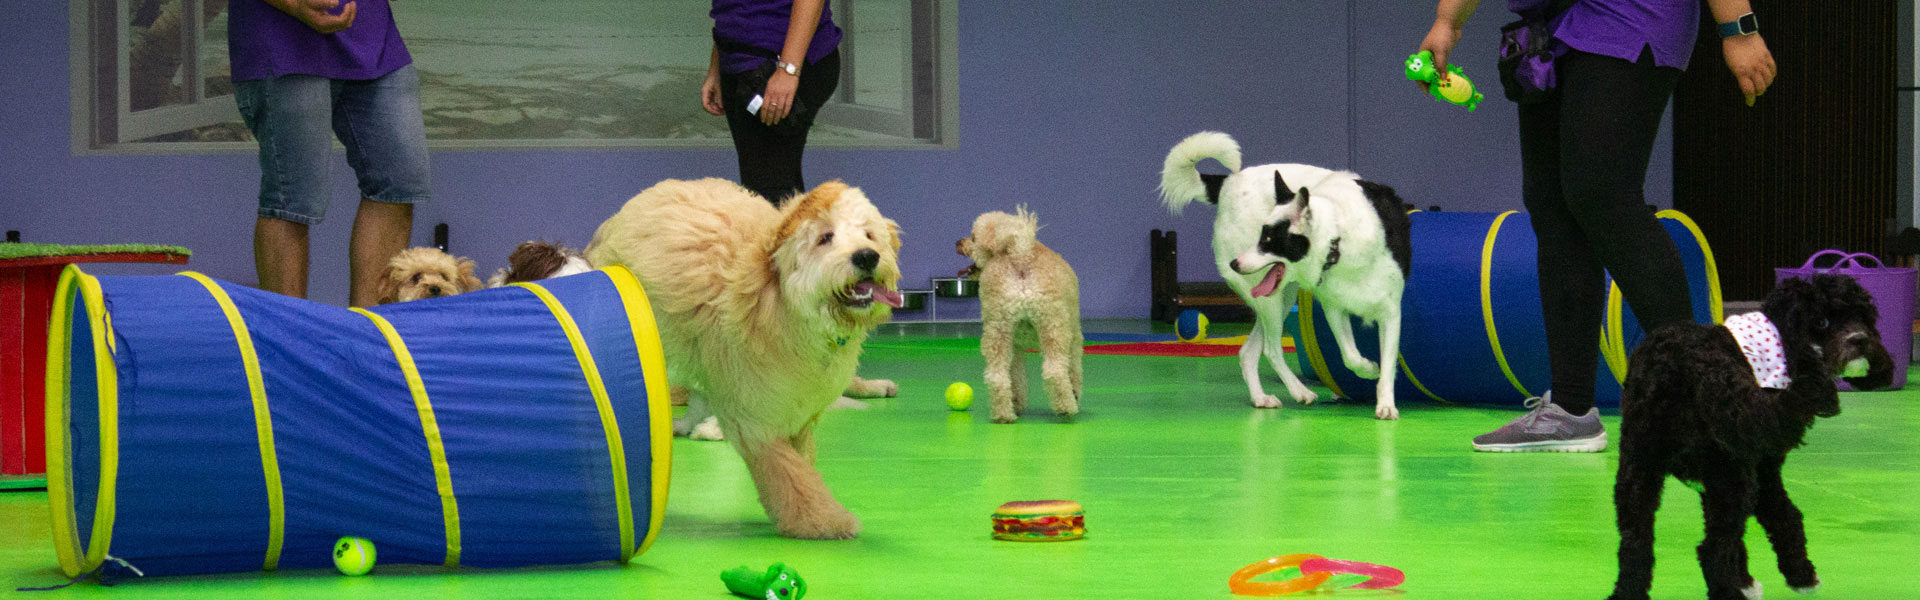 Dogs Playing at a Doggy Daycare